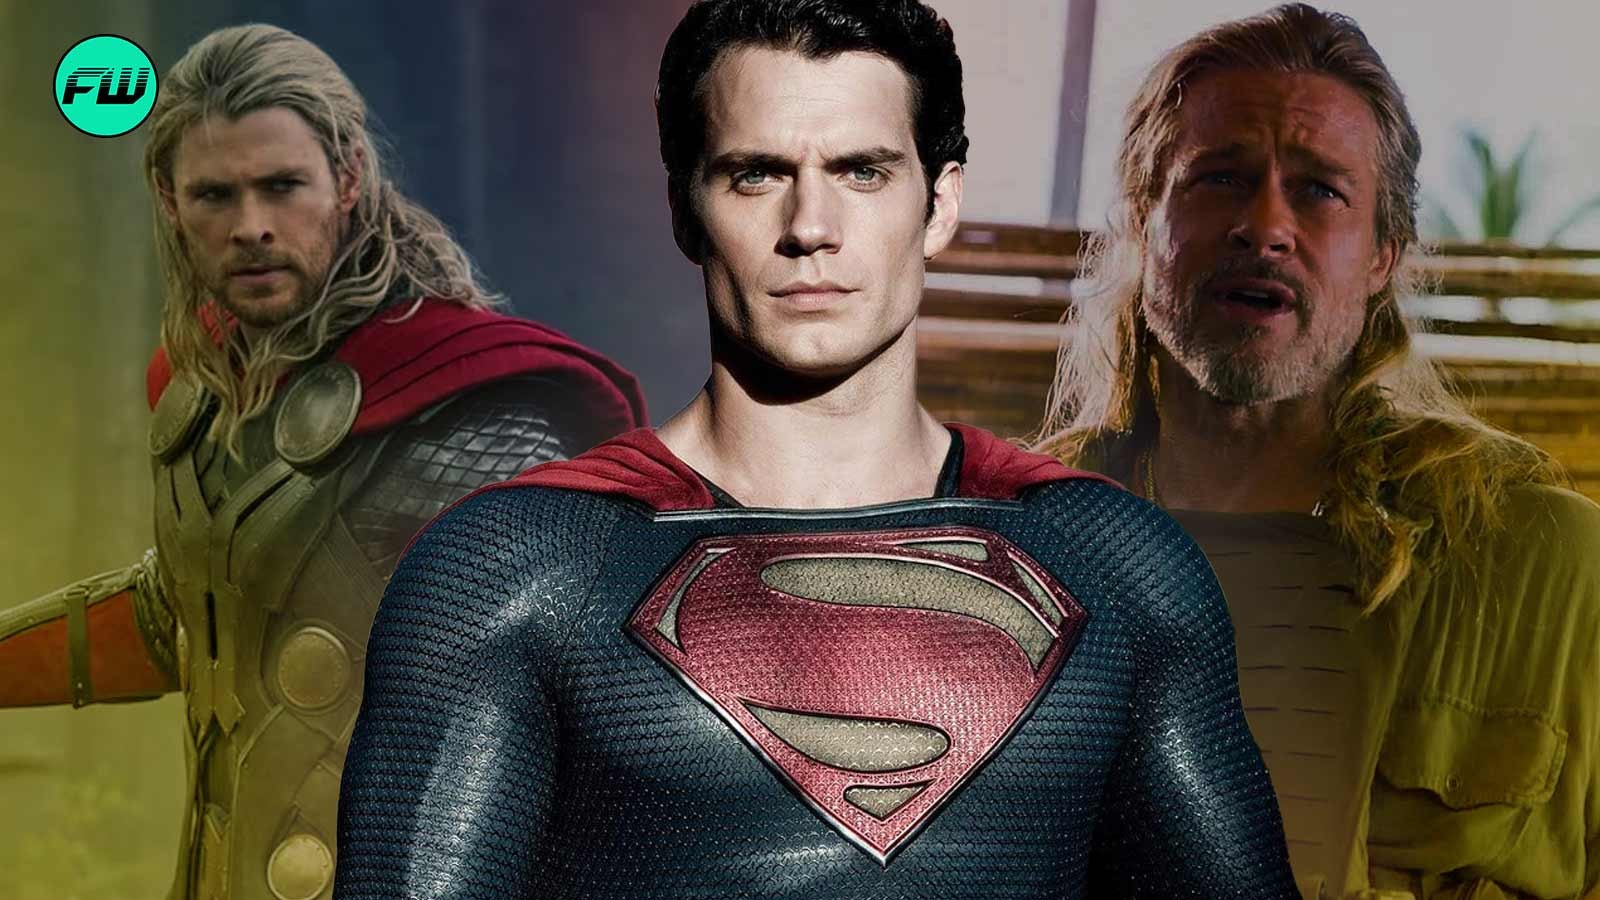 Fans are willing to ignore even Brad Pitt and Chris Hemsworth for “Man of Steel” Henry Cavill